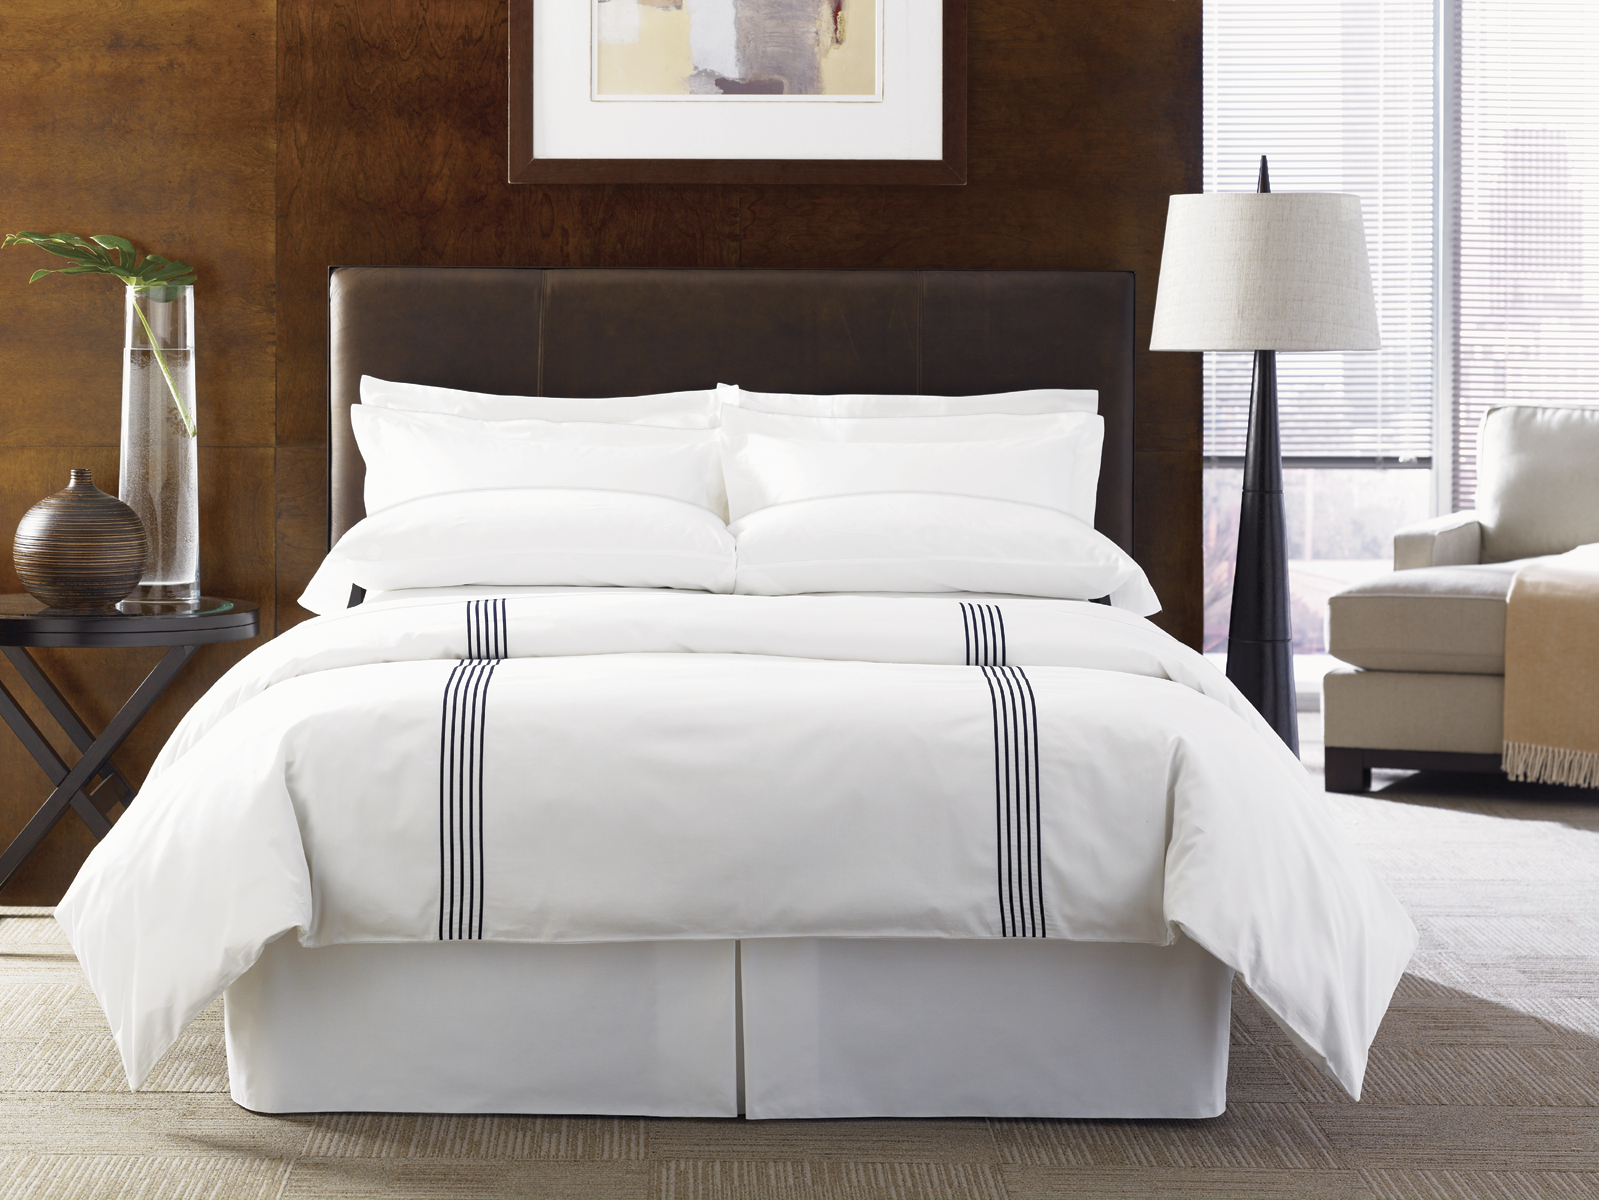 Things to Consider While Buying Hotel Bed Sets, Jante Textile